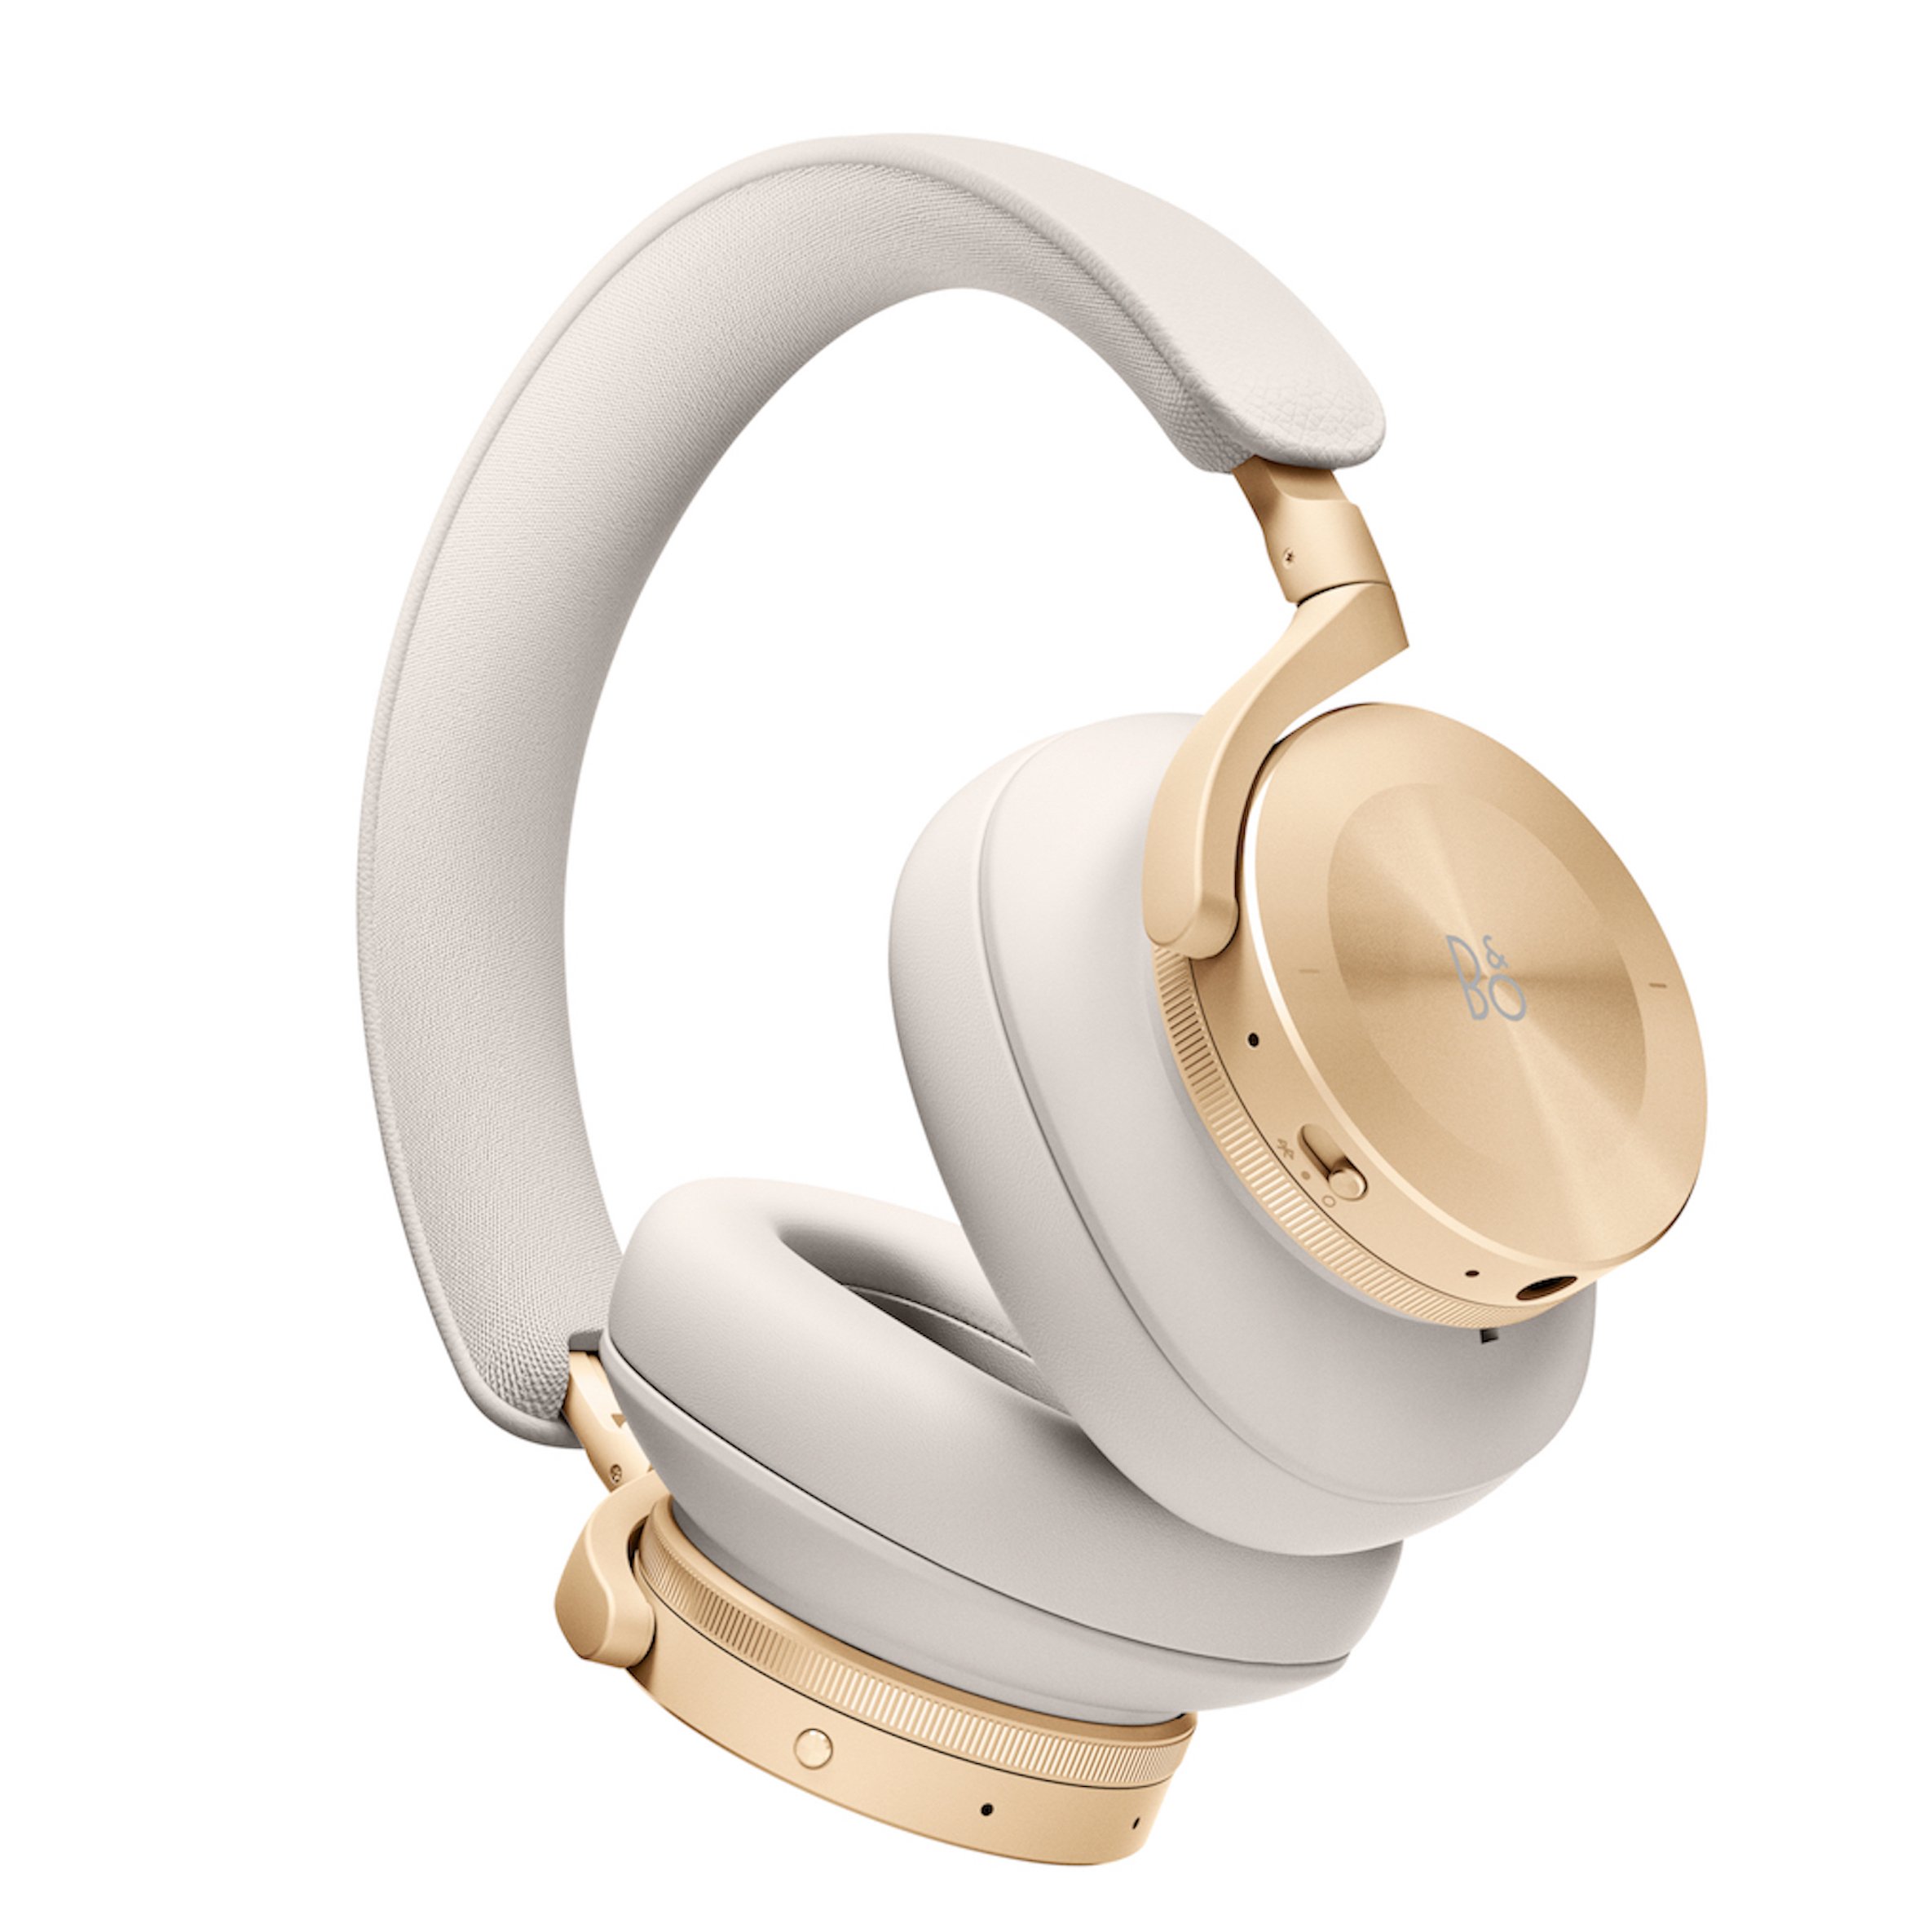 PS Beoplay H95 GreyMist Angle Twist.tif Bang & Olufsen Launch Premium ‘Golden Collection’ With Reimagined Audio Products